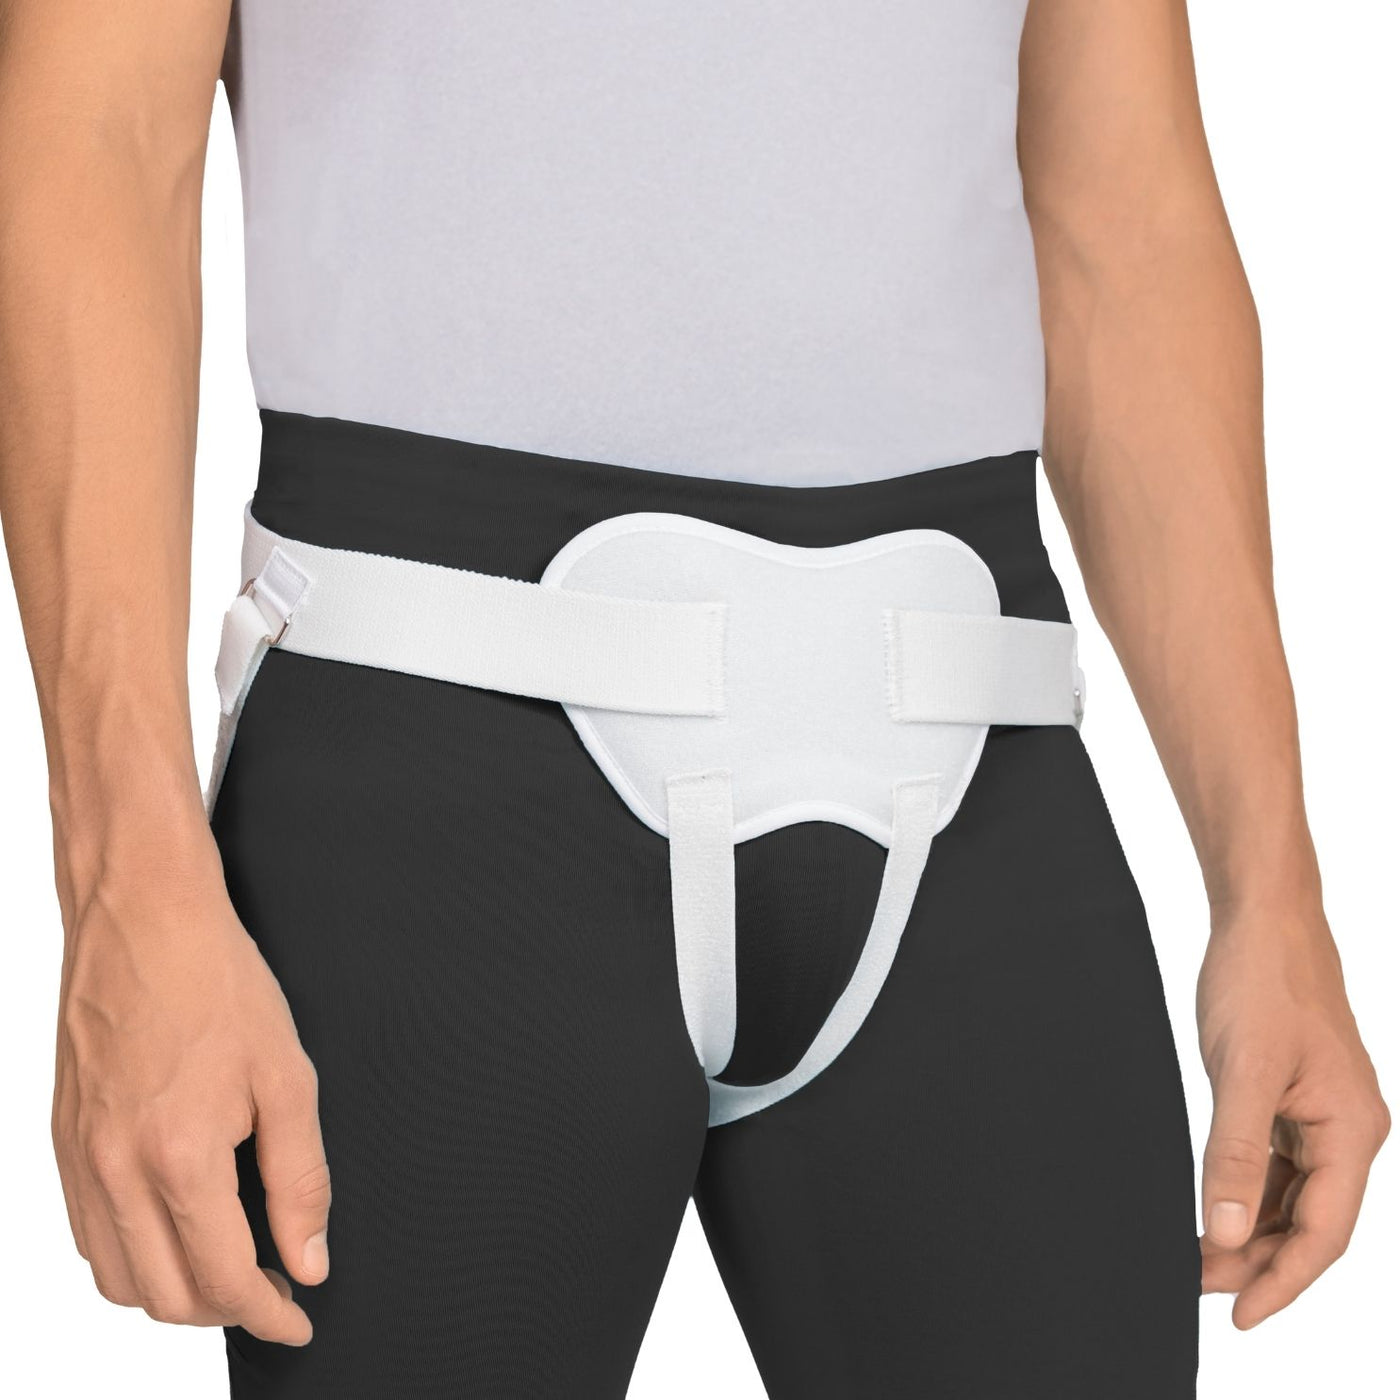  Hernia Support - Men's Underwear / Men's Clothing: Clothing,  Shoes & Jewelry